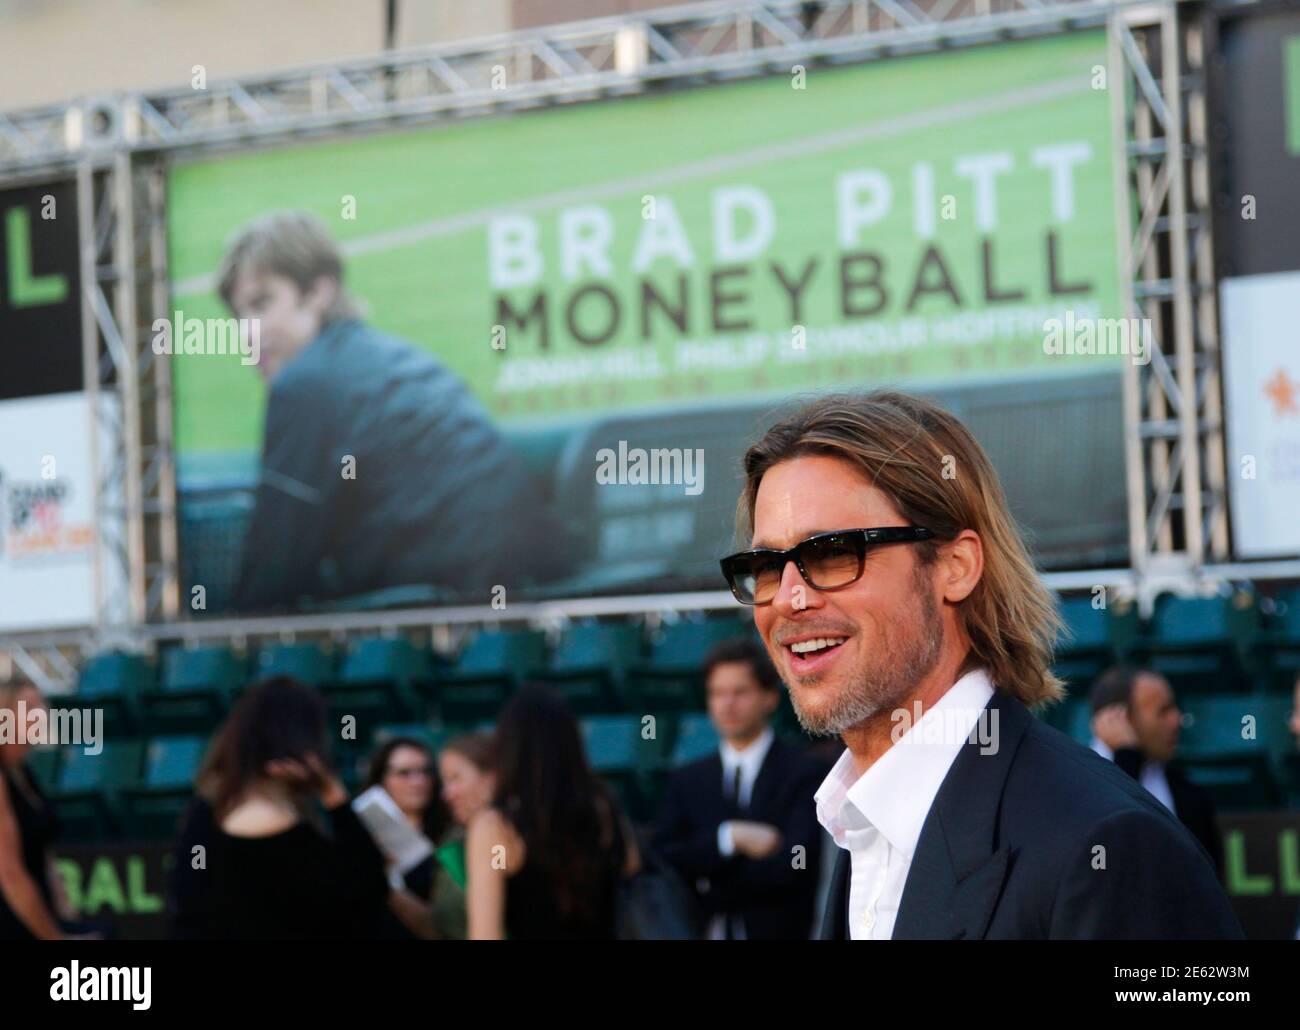 U.S. actor Brad Pitt, who stars as Oakland Athletics' general manager Billy  Beane, arrives for the world premiere of the film "Moneyball" in Oakland,  California September 19, 2011. REUTERS/Robert Galbraith (UNITED STATES -